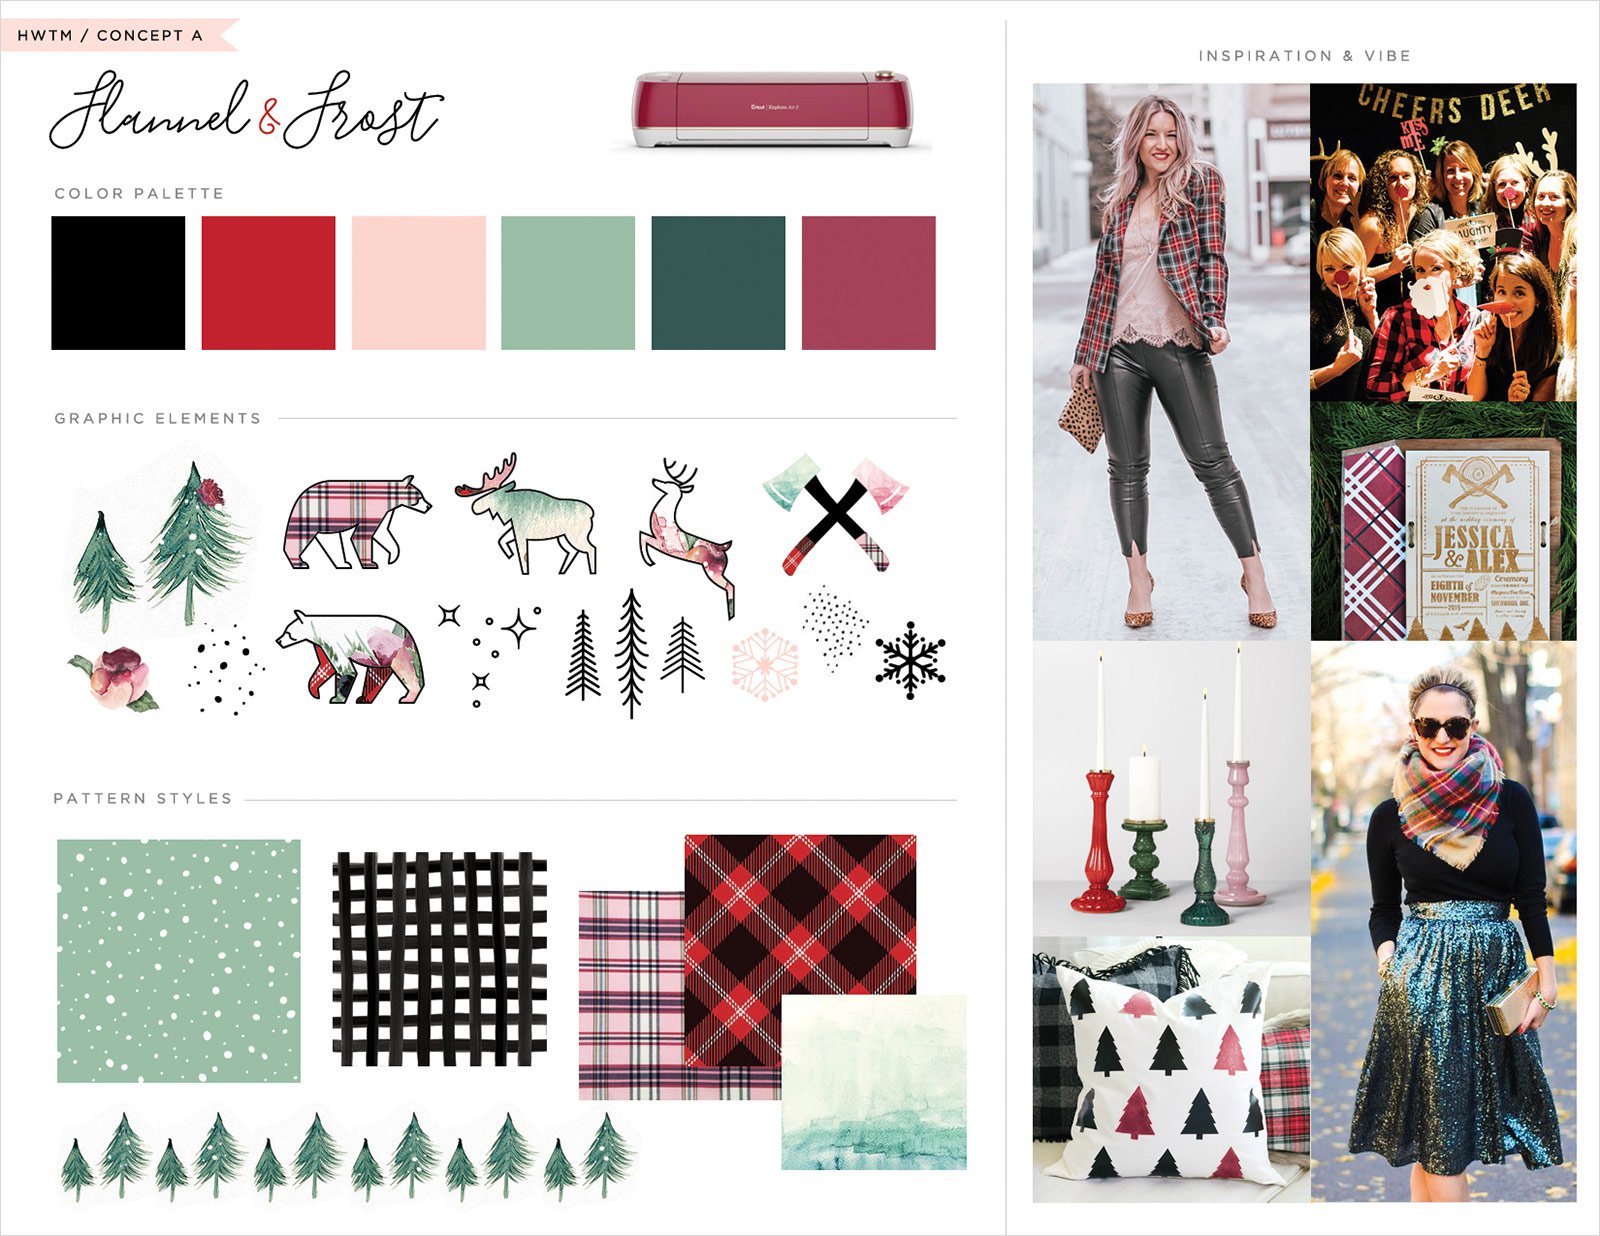 Inspiration Board - Flannel and Frost Theme